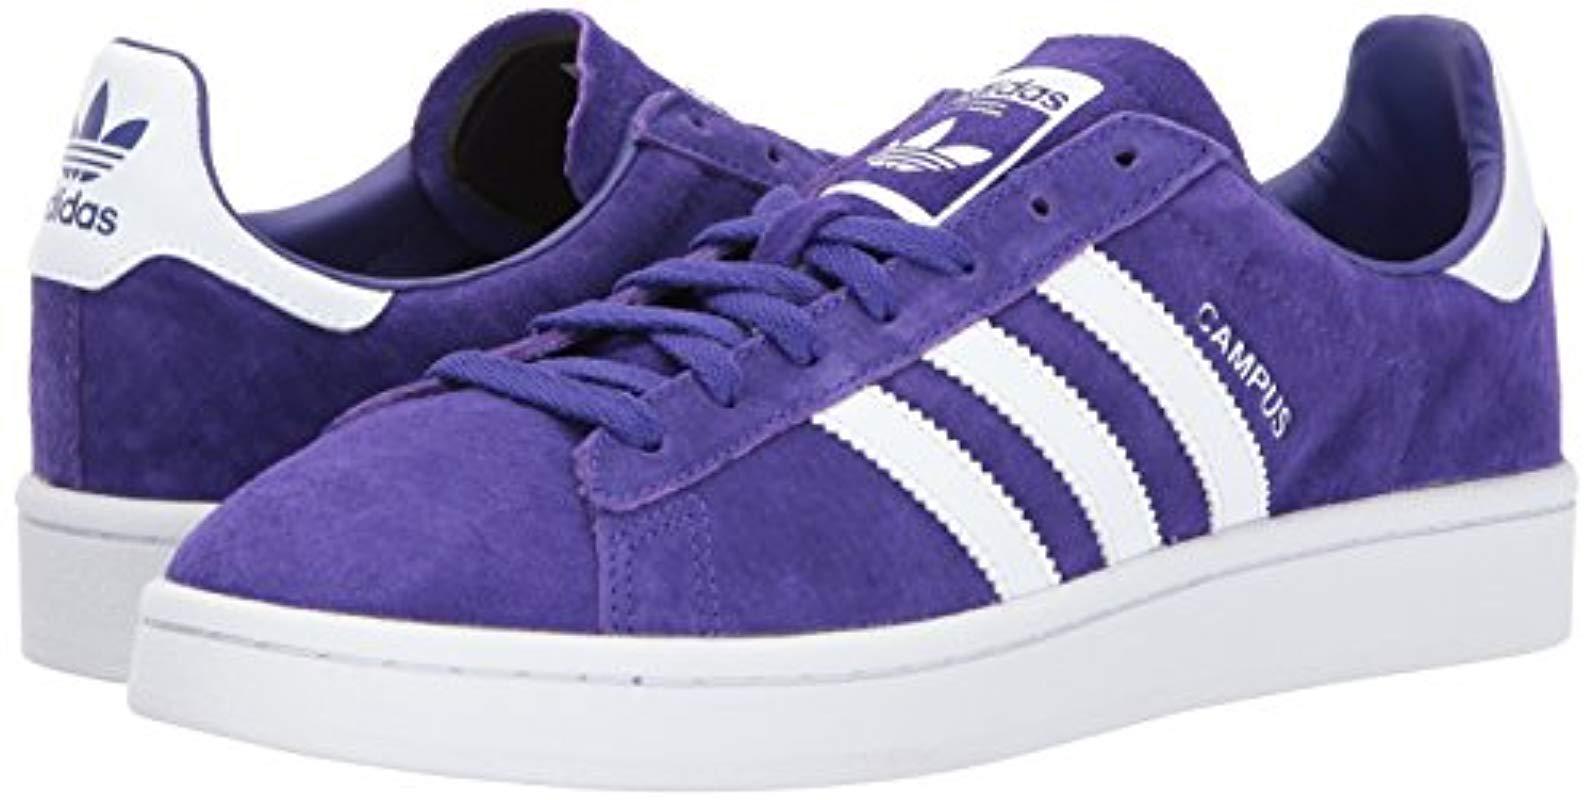 adidas Campus Nubuck Shoes in Purple for Men - Lyst